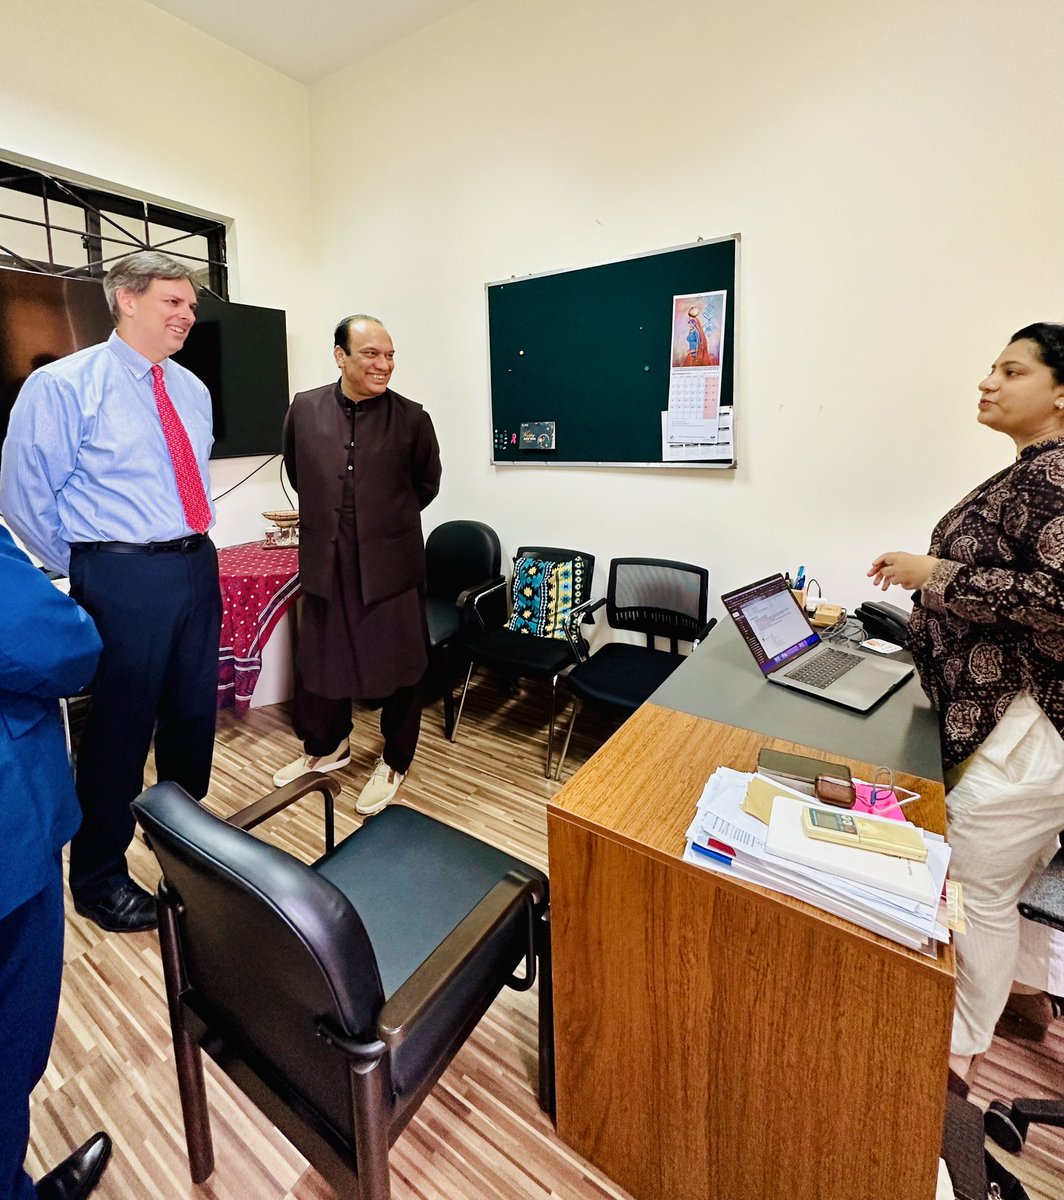 Head of USAID Health Program Pakistan, Mr. Bradely Cronk visited Health Services Academy